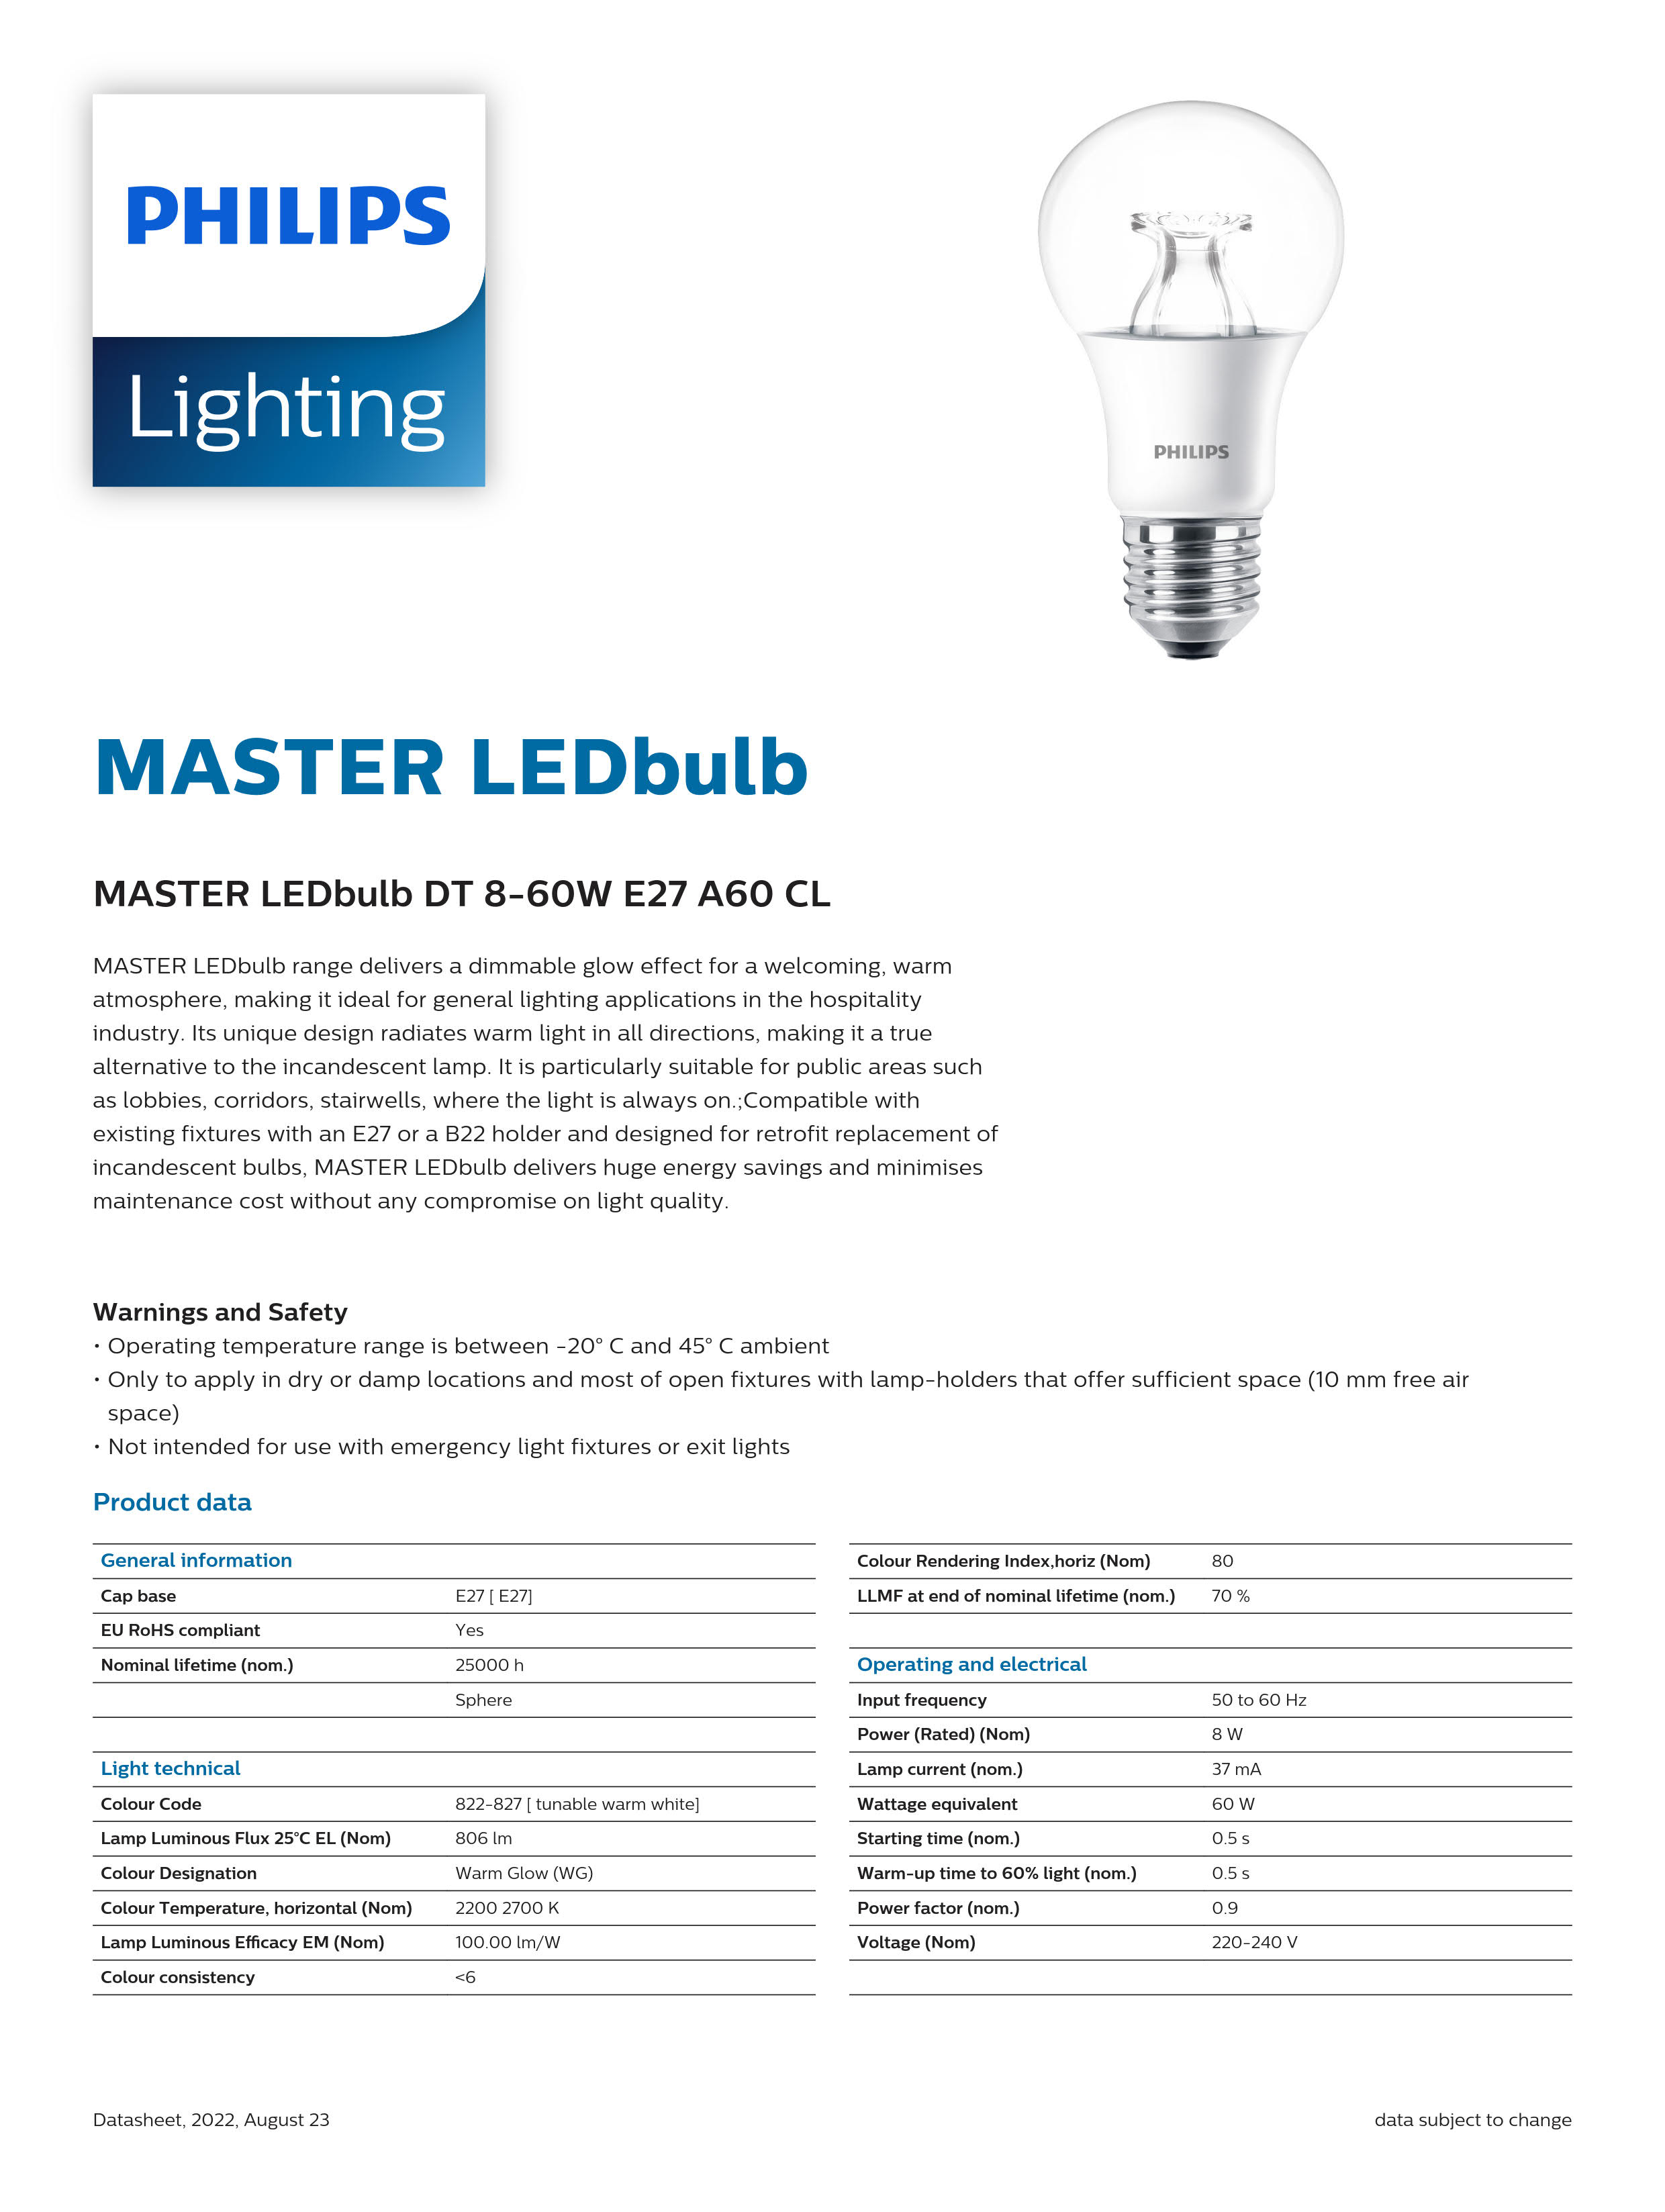 PHILIPS dimmable bulb MASTER LED bulb DT 8-60W E27 A60 CL 929002490232